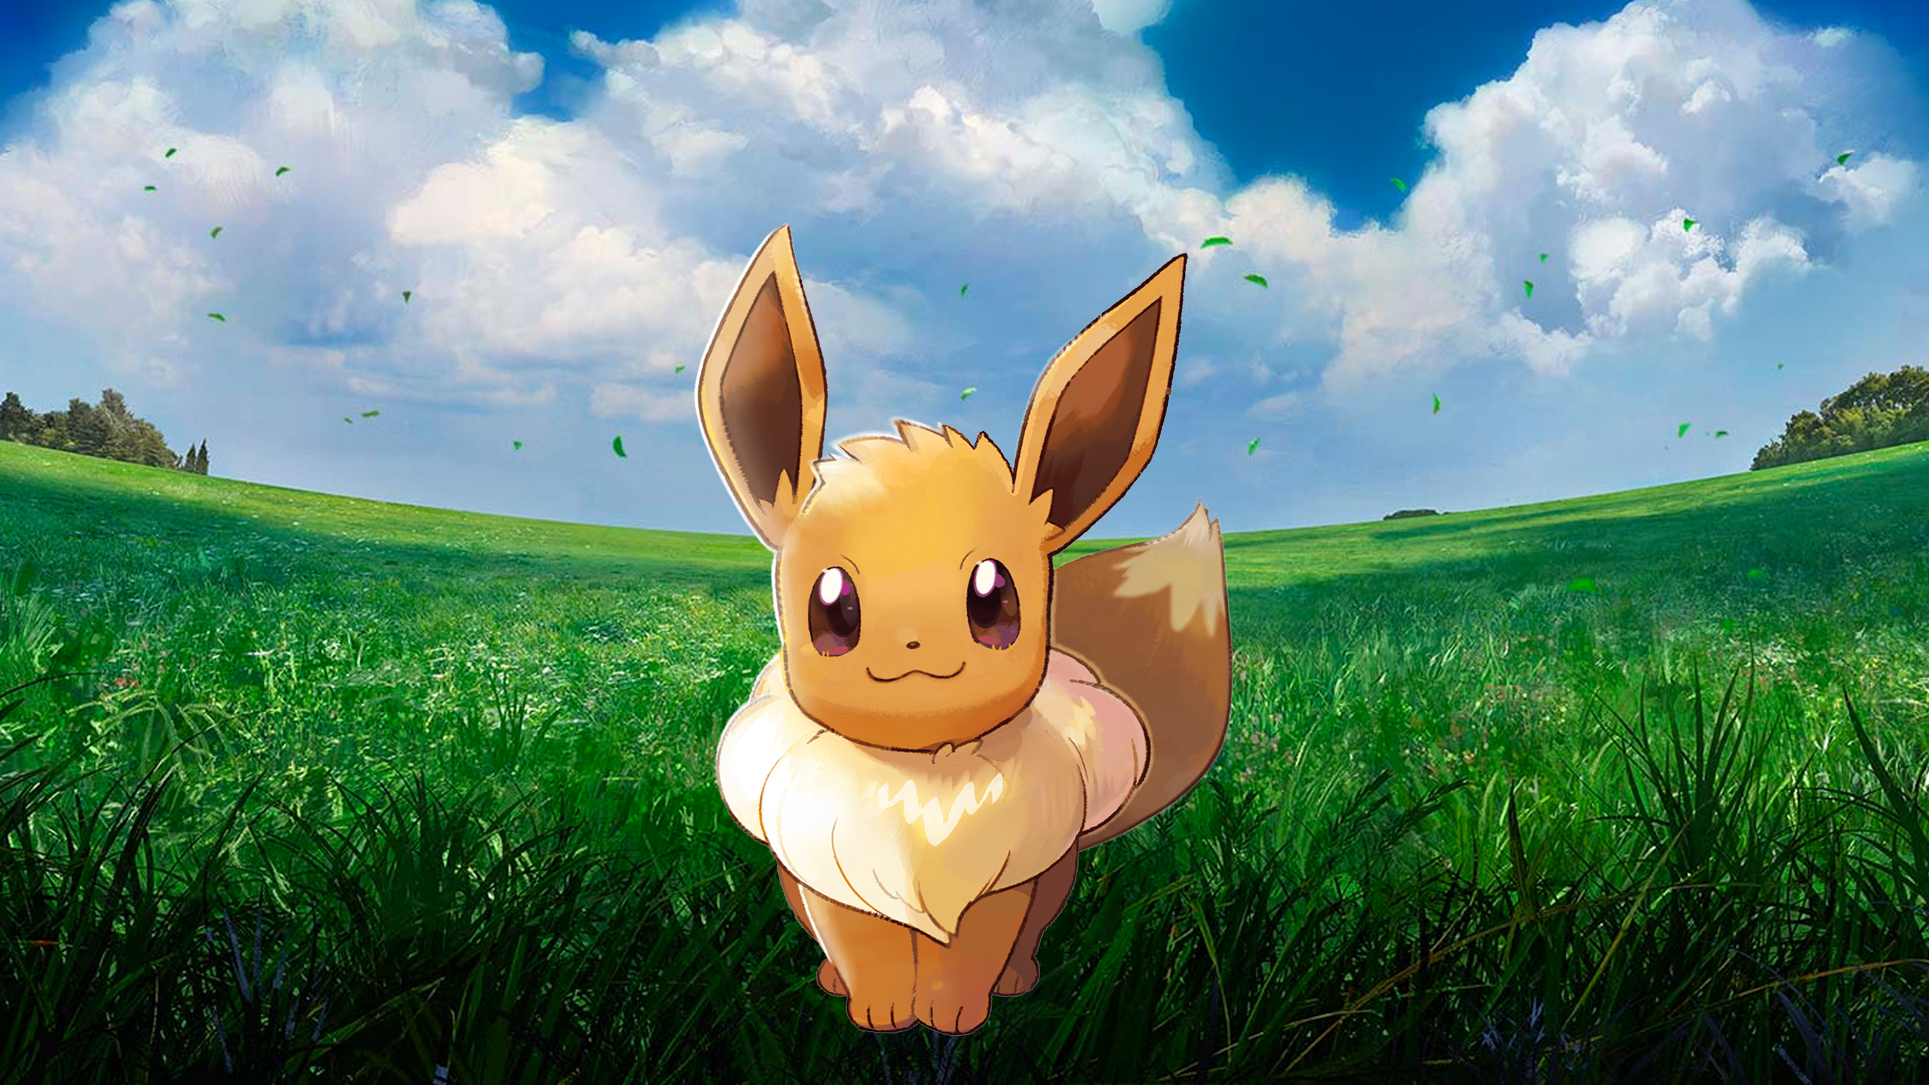 Pokemon Let's Go Eevee (v2) Wallpapers - Cat with Monocle